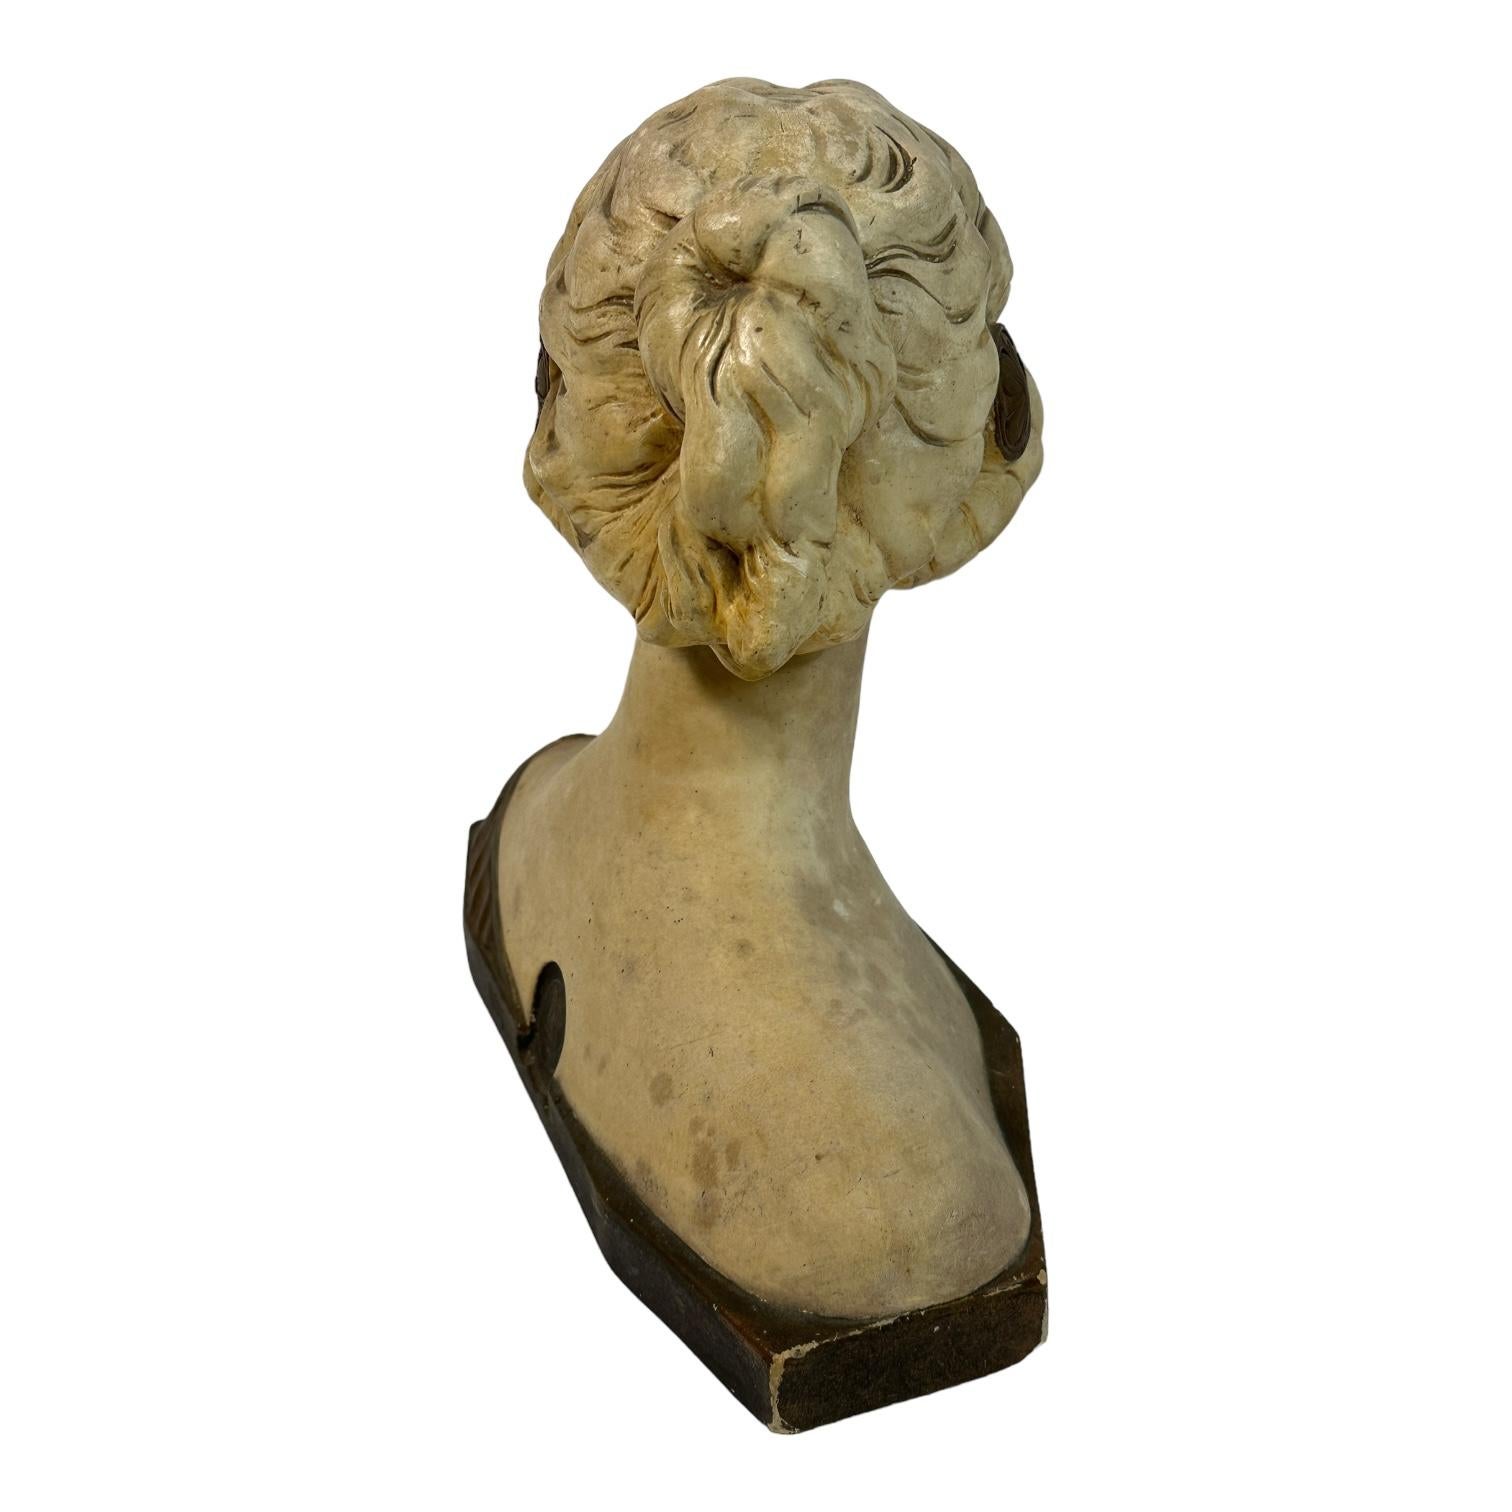 Hand-Crafted End of 19th Century Art Nouveau Lady or Girl Bust, 1890s, Germany